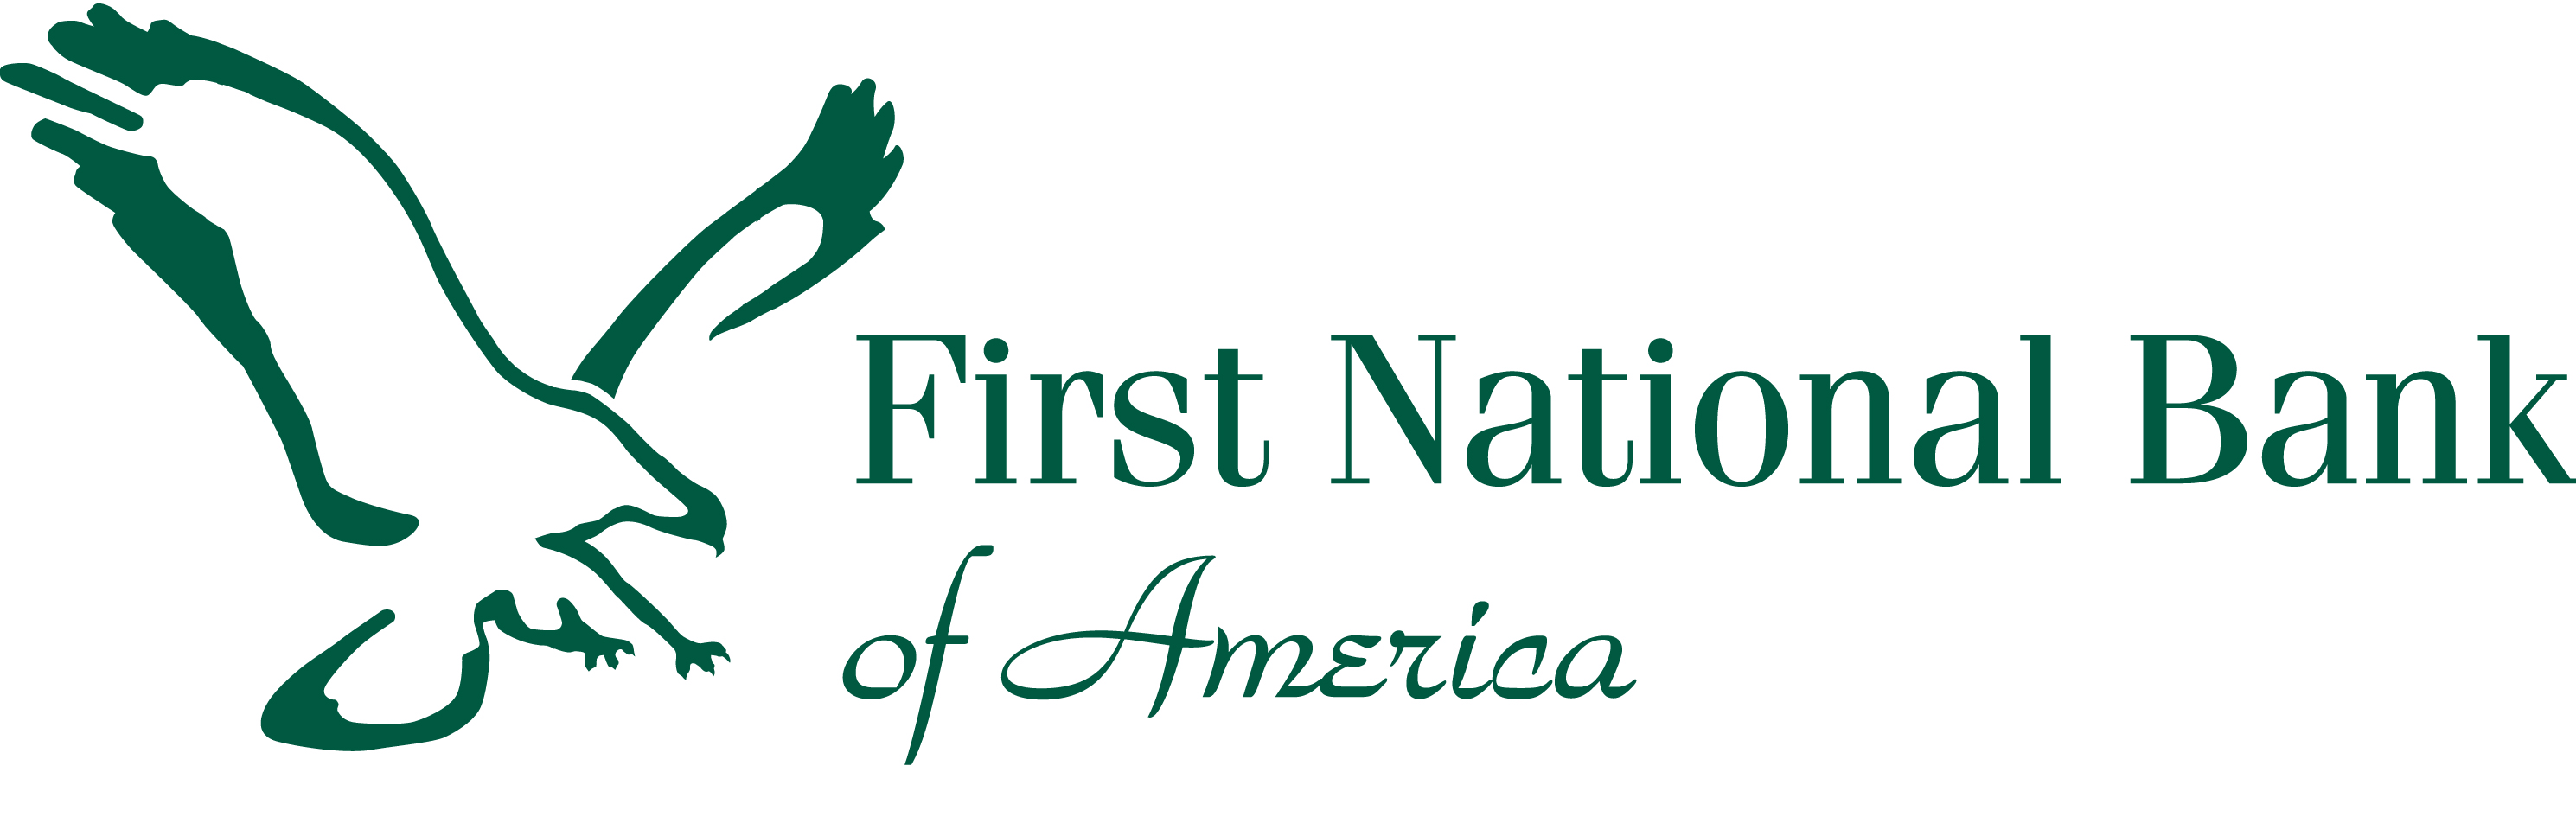 R.J. Kistka serves as chief lending officer at First National Bank of America (FBNA), headquartered in East Lansing, Mich.